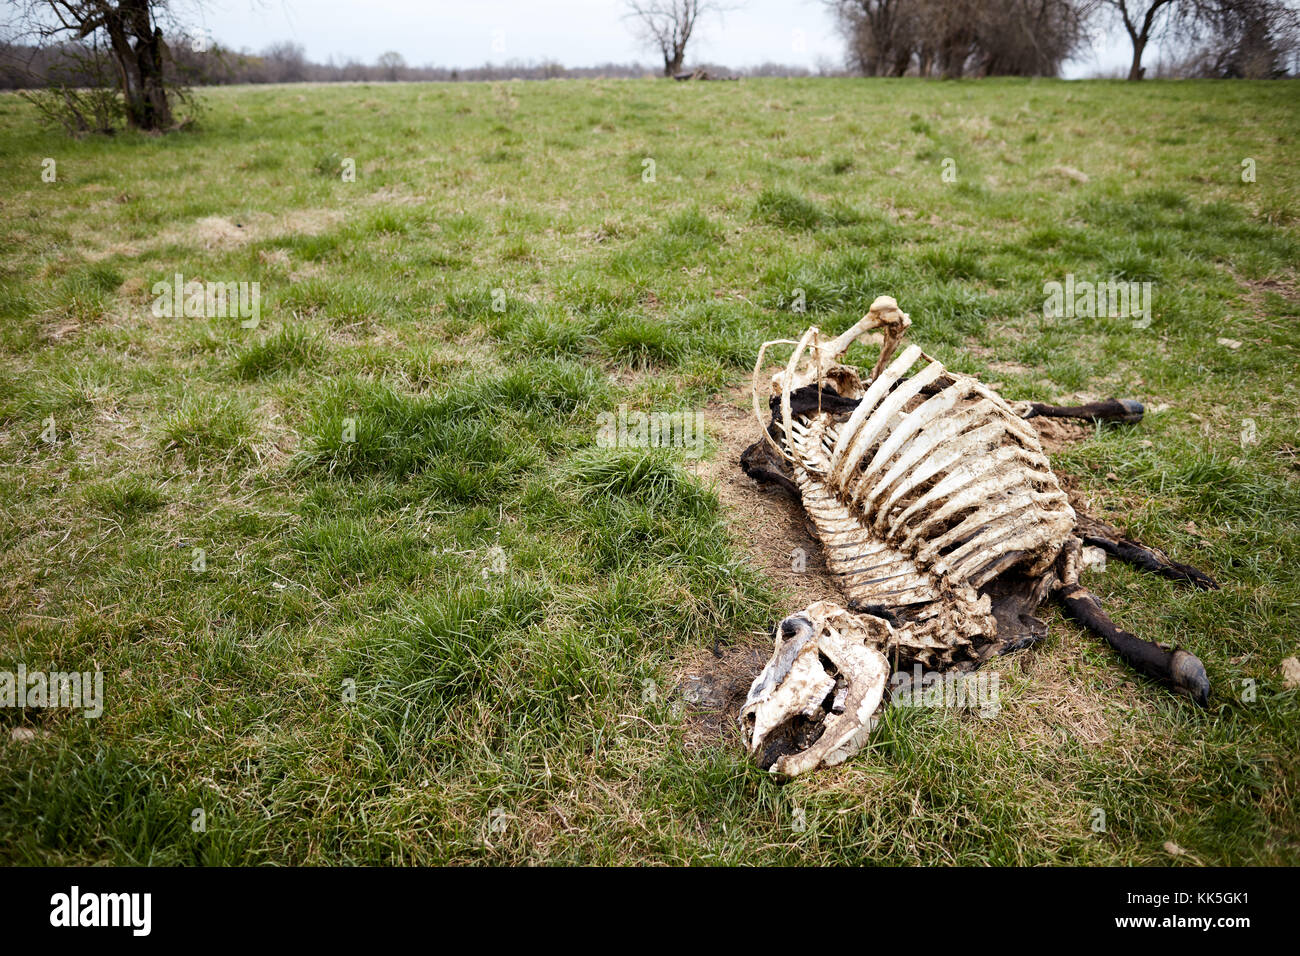 Dead cow skeleton with skin decomposing on grass Stock Photo